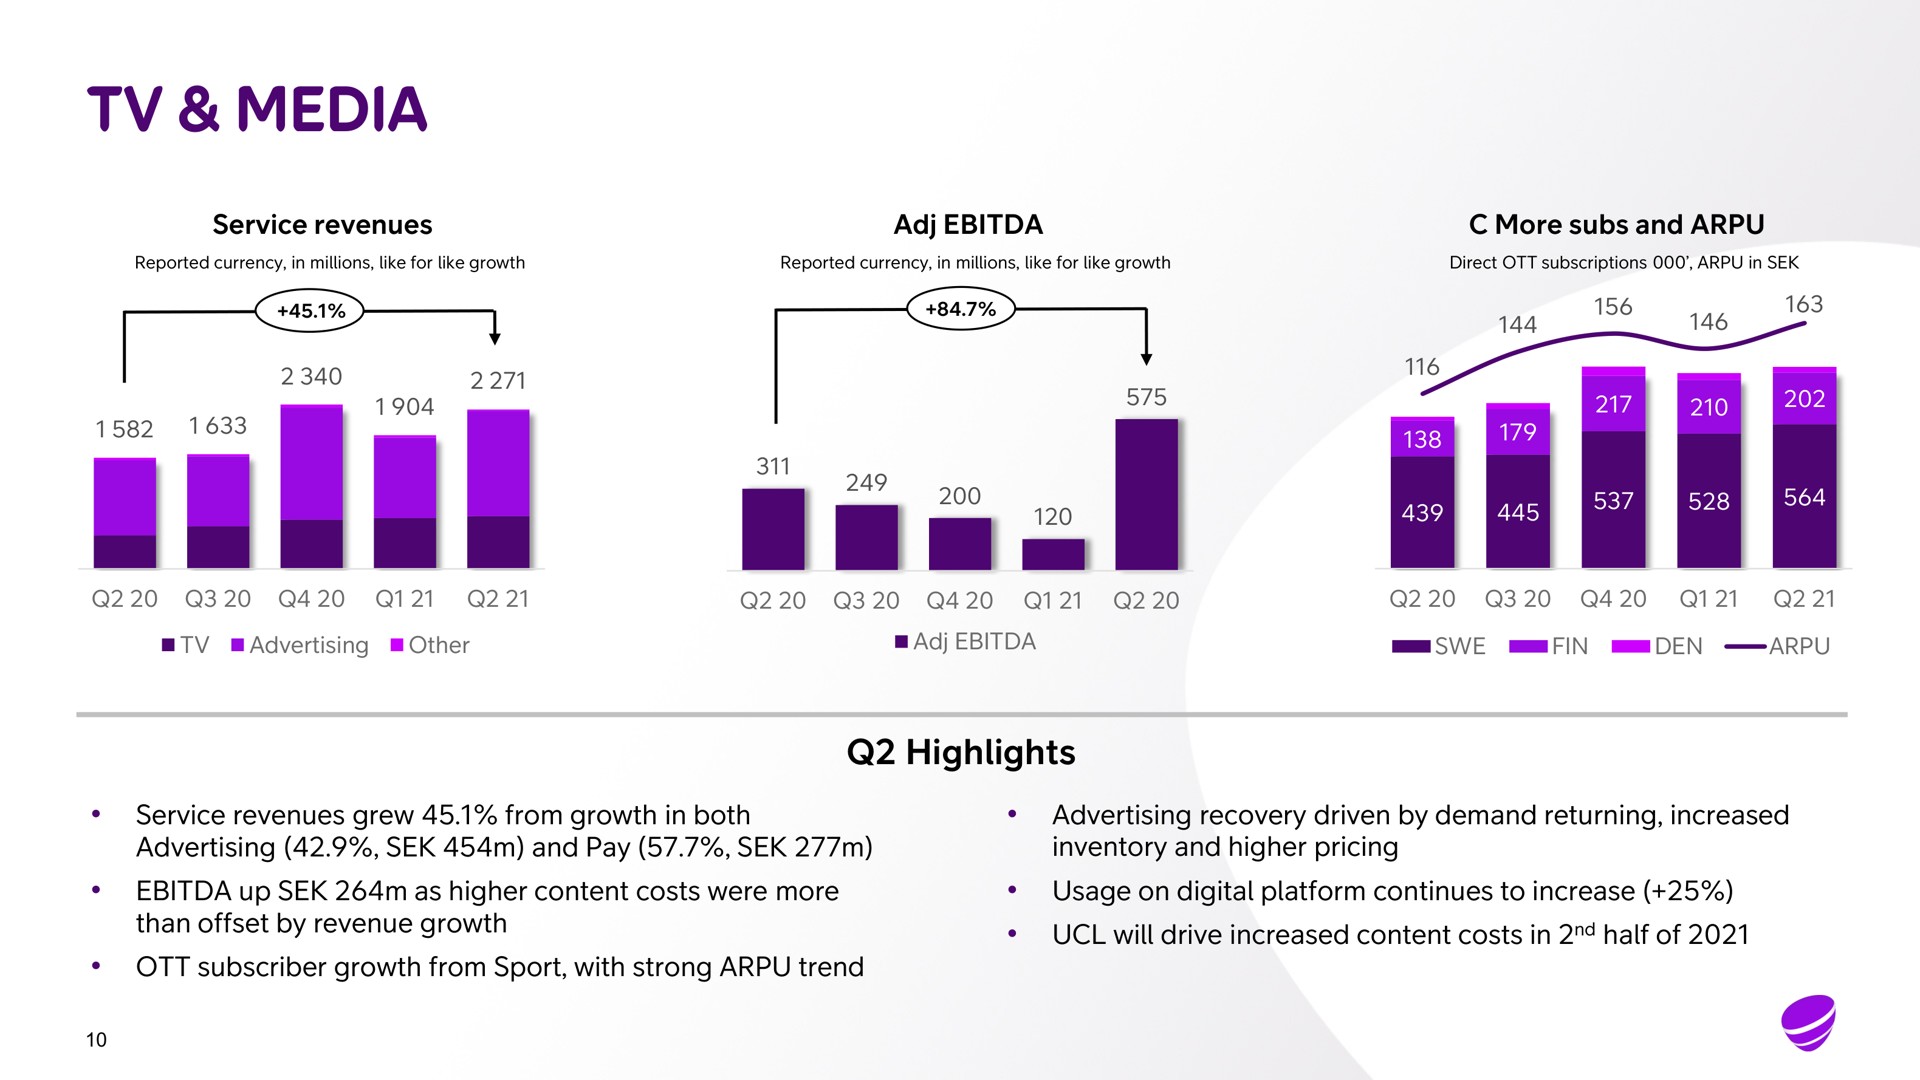 media service revenues more subs and highlights service revenues grew from growth in both advertising and pay advertising recovery driven by demand returning increased inventory and higher pricing up as higher content costs were more than offset by revenue growth usage on digital platform continues to increase will drive increased content costs in half of subscriber growth from sport with strong trend | Telia Company